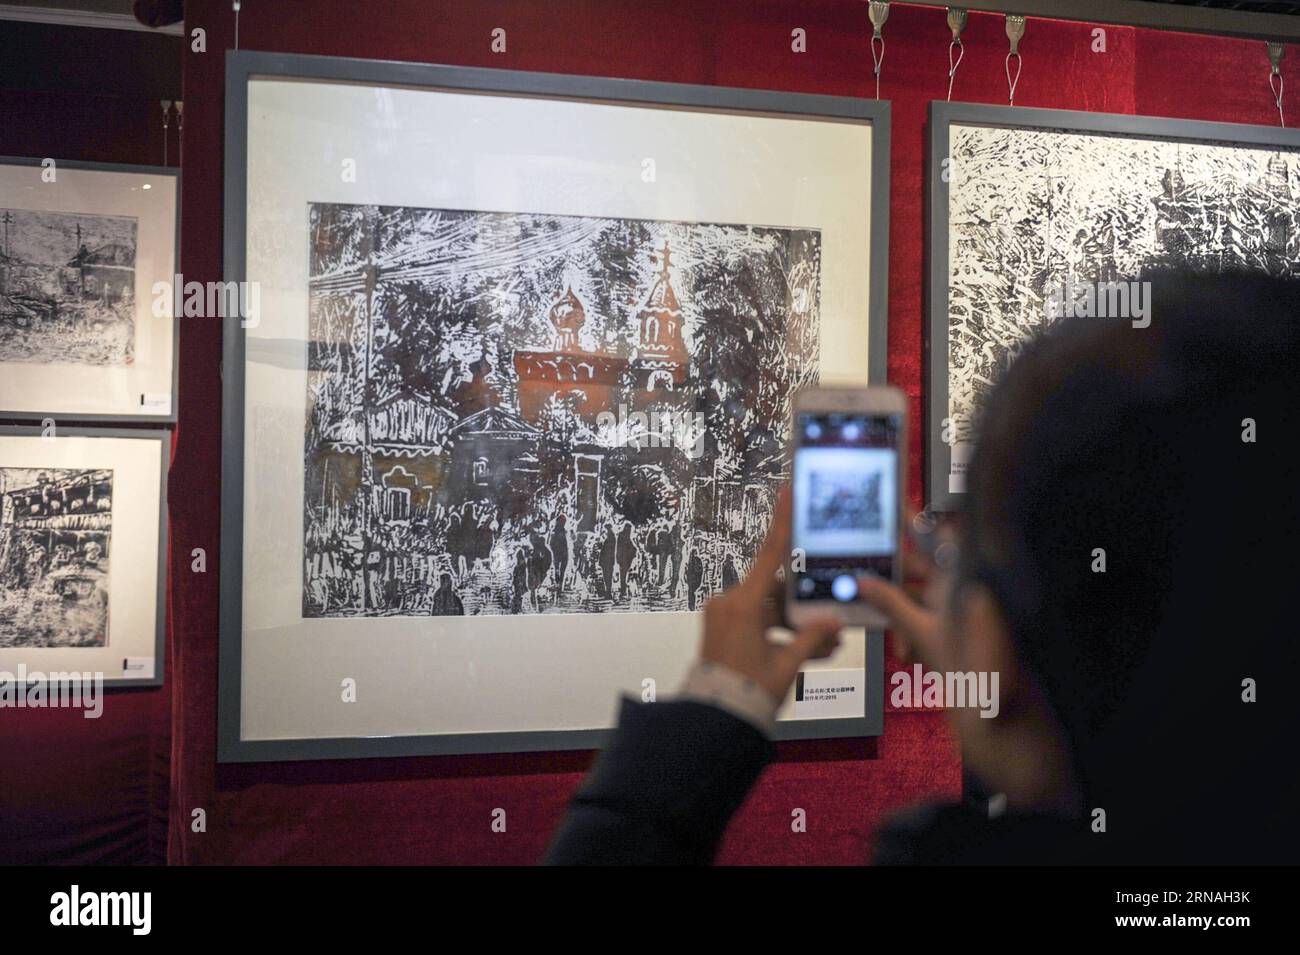 (160126) -- HARBIN, Jan. 26, 2016 -- A visitor takes photos at an exhibition of ice engraving painting in Harbin, capital of northeast China s Heilongjiang Province, Jan. 26, 2016. The pictures on display were printed from engraved ice slabs, according to artist Zhu Xiaodong. He said each ice slab was able to print out some 20 pages yielding variant results as the ice melted down. ) (twy) CHINA-HARBIN-ICE-ENGRAVING PAINTING (CN) WangxSong PUBLICATIONxNOTxINxCHN   160126 Harbin Jan 26 2016 a Visitor Takes Photos AT to Exhibition of ICE Engraving Painting in Harbin Capital of Northeast China S H Stock Photo